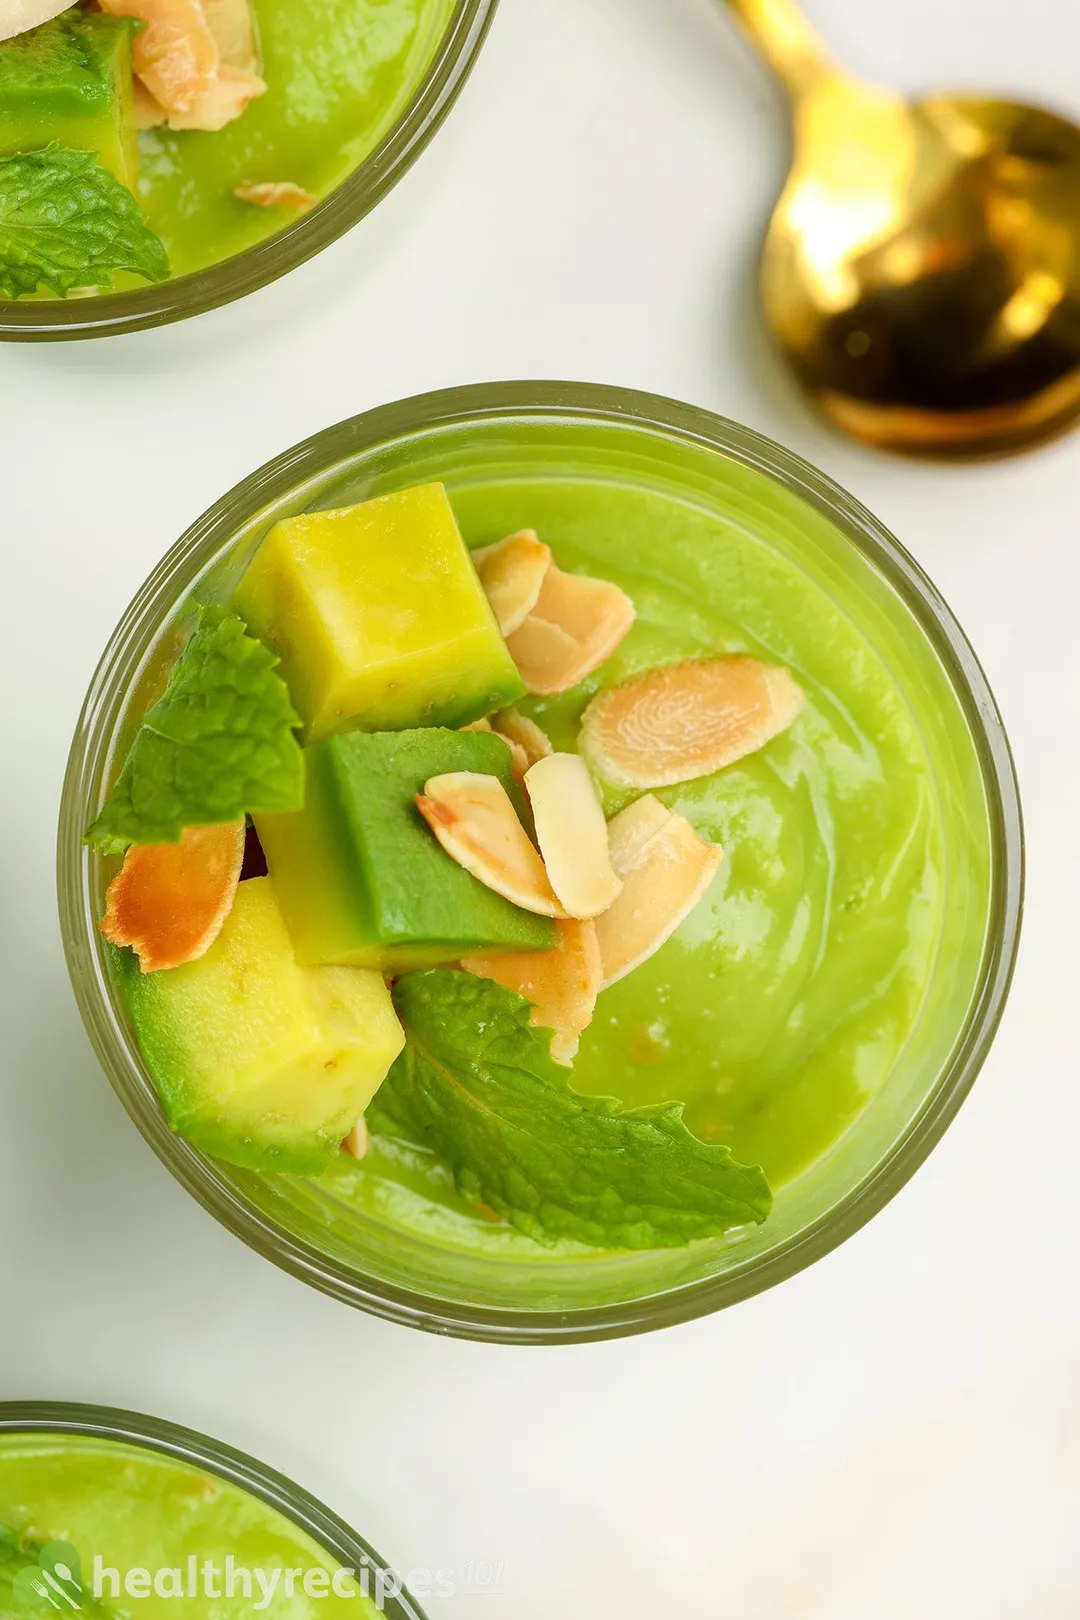 top view of a glass of avocado mouse with cubes avocado and sliced almonds on top, decorated by a golden spoon and other glass